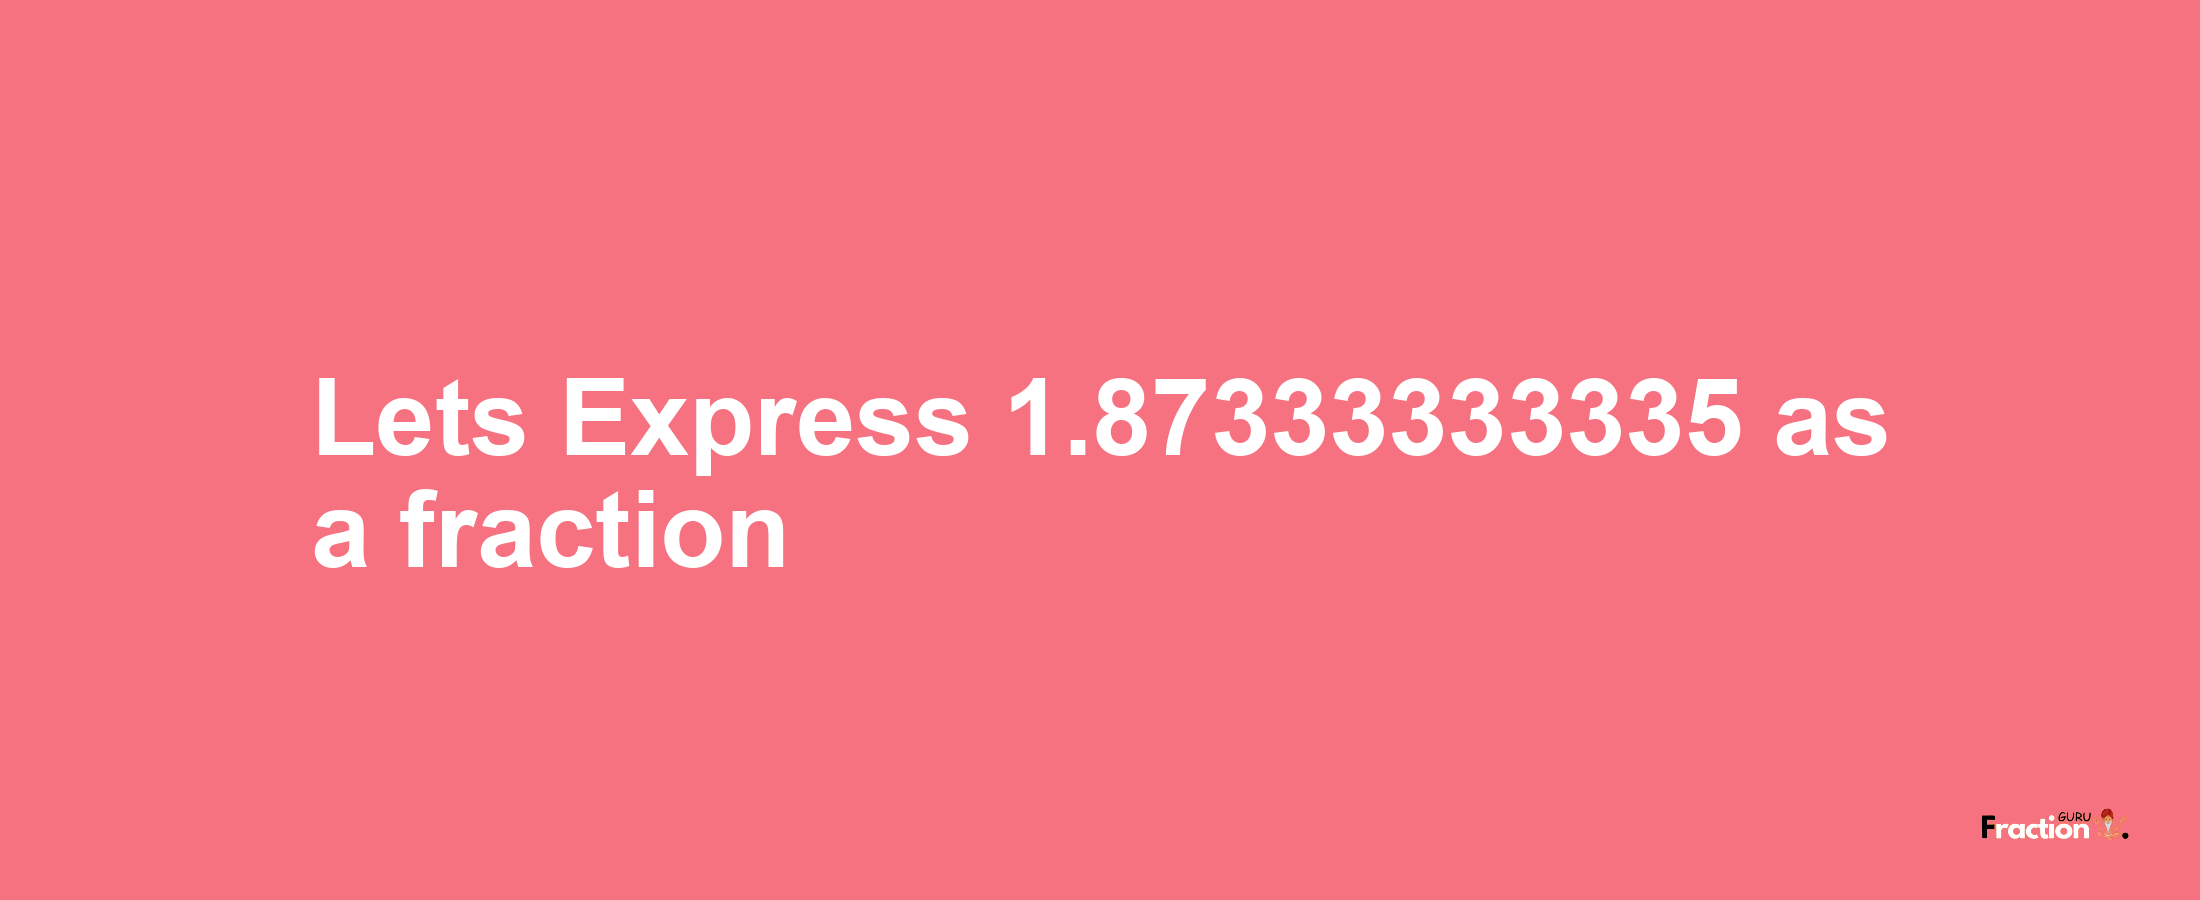 Lets Express 1.87333333335 as afraction